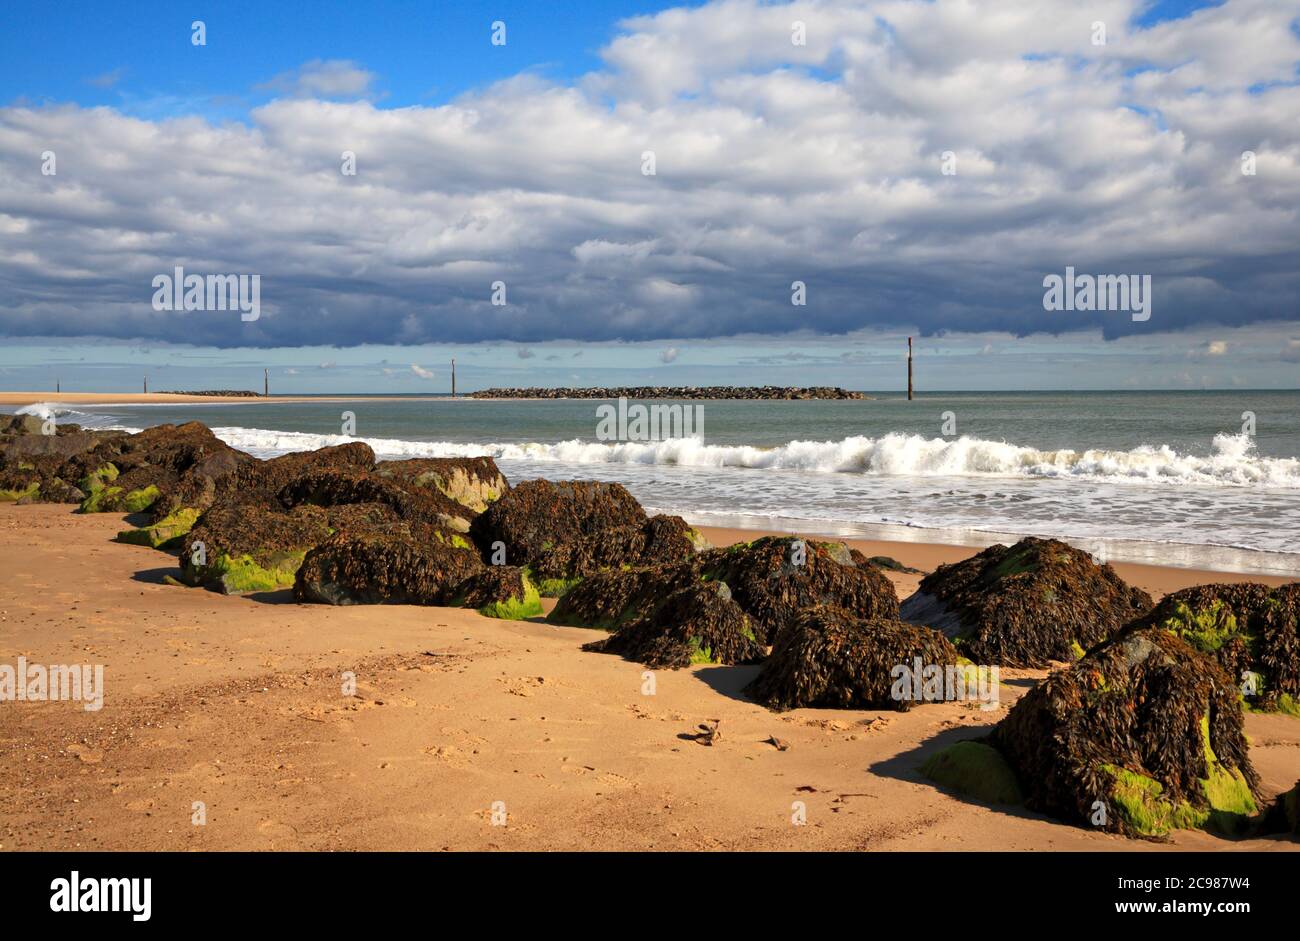 A view of the beach with rock armour and artificial reefs on the North Norfolk coast at Sea Palling, Norfolk, England, United Kingdom. Stock Photo